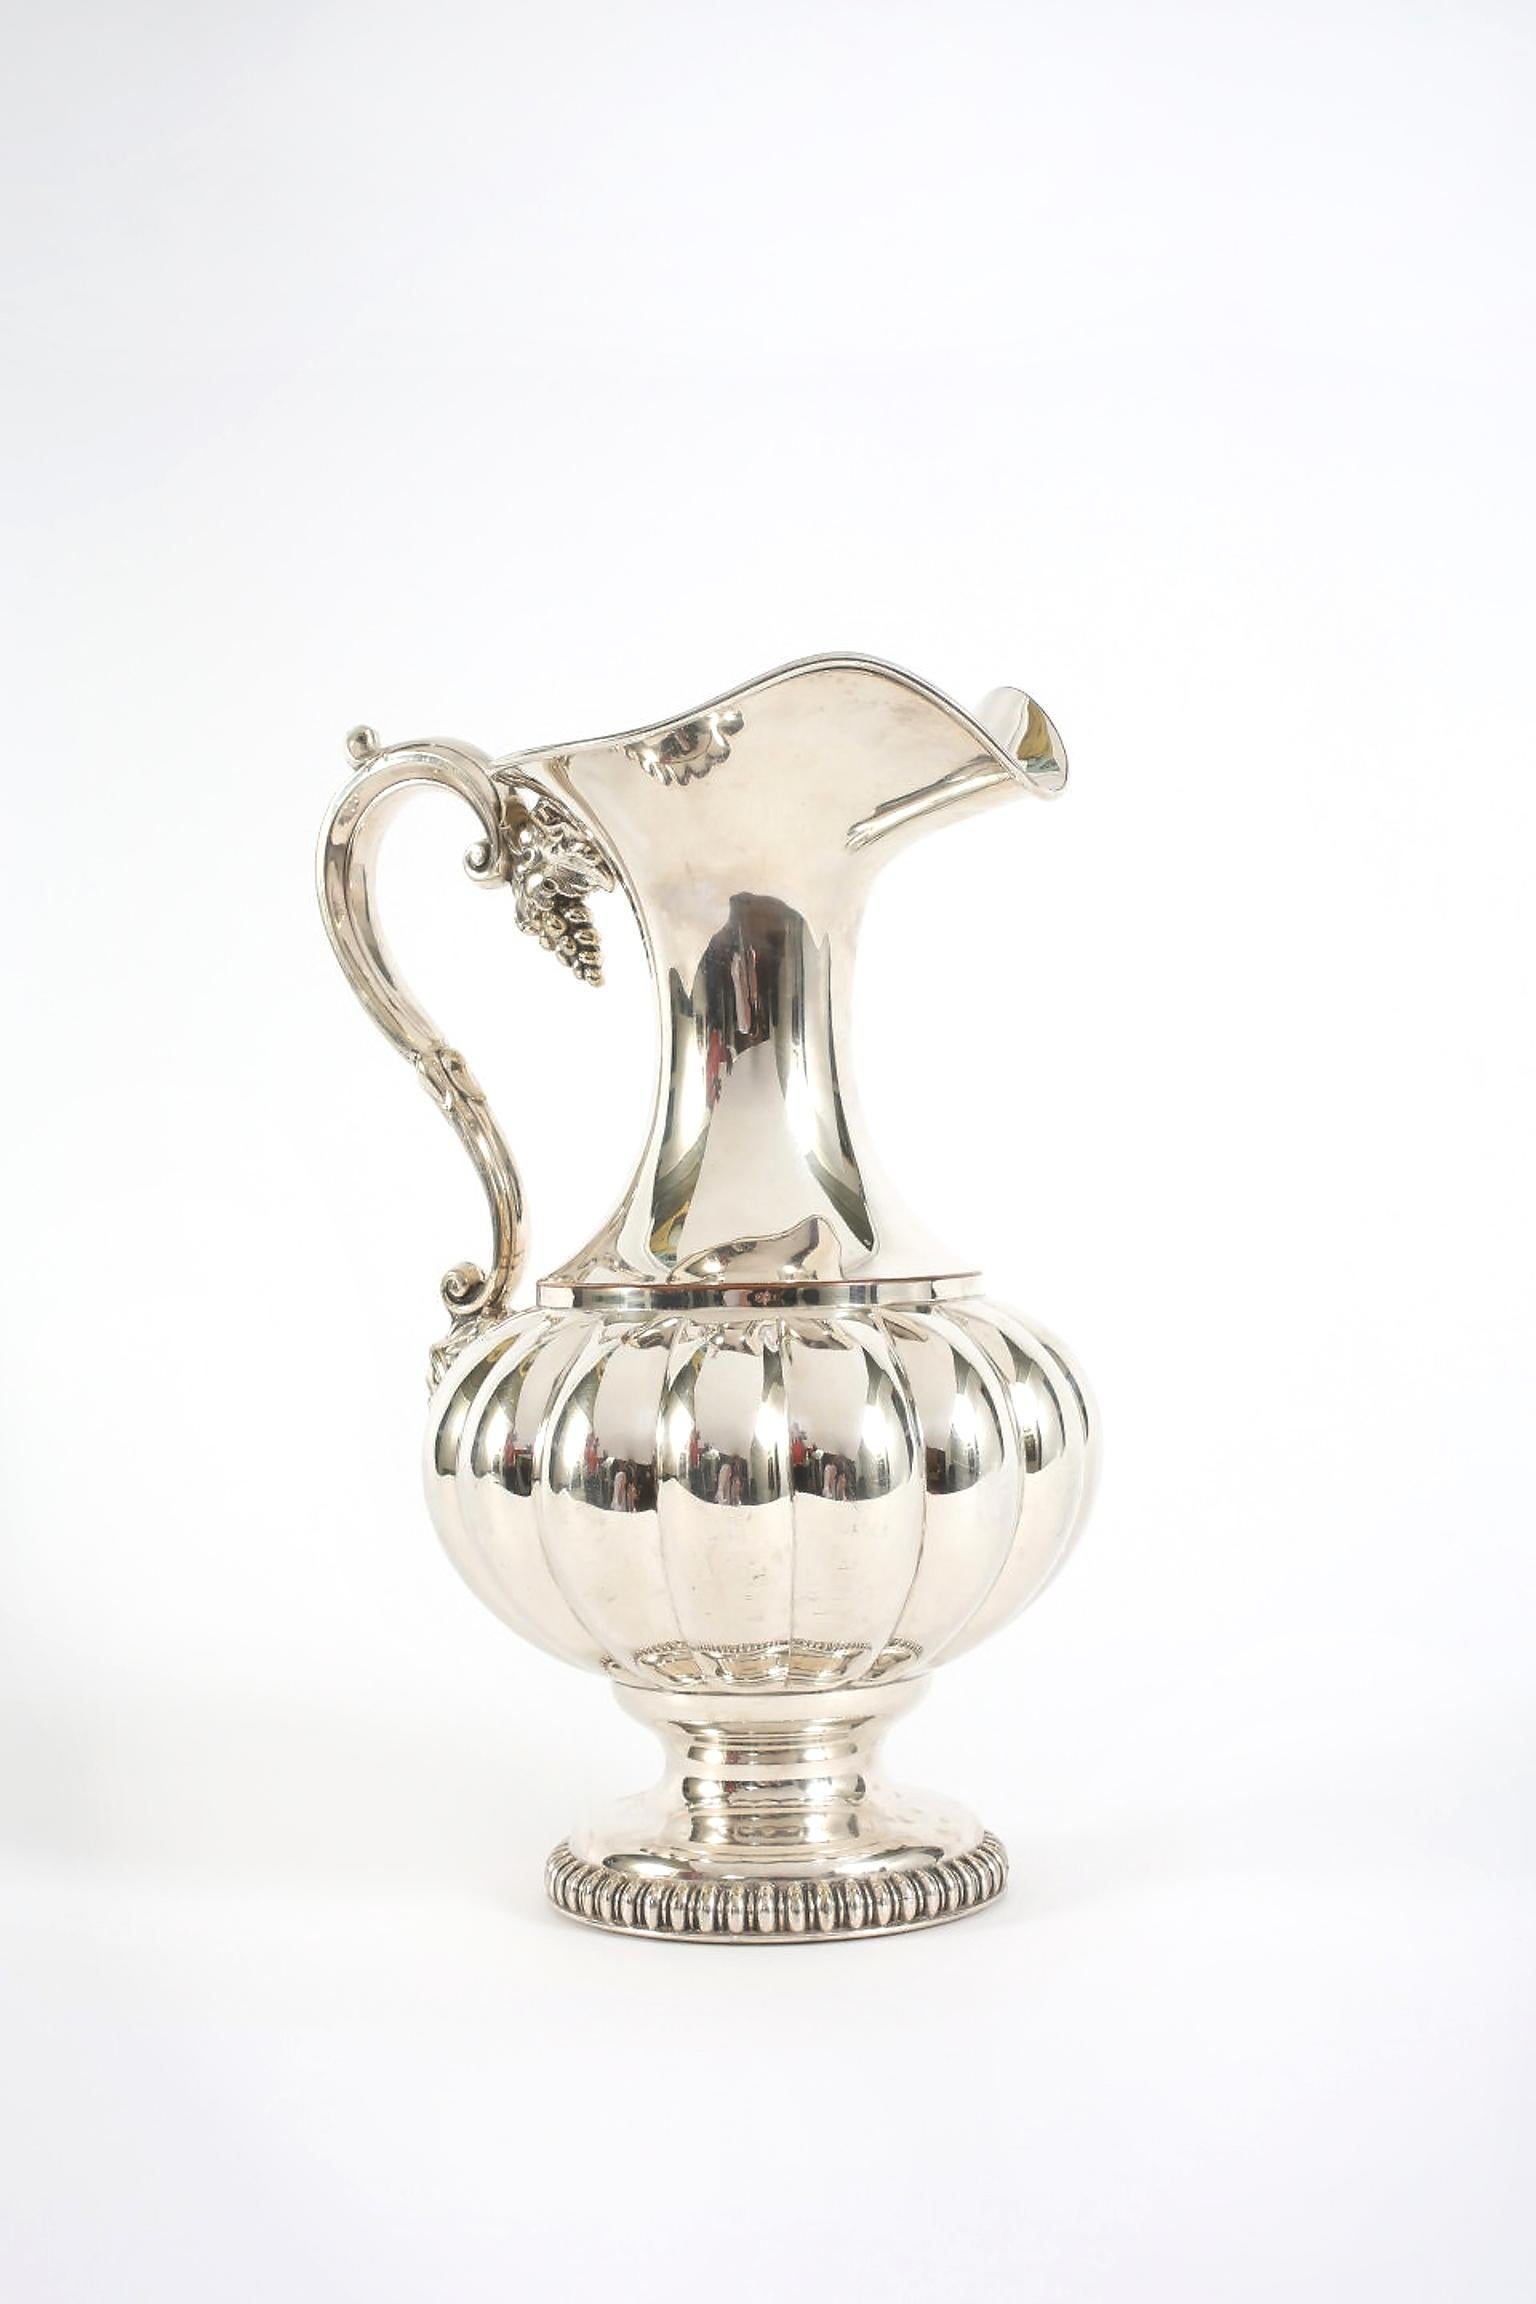 Old Sheffield silver plated water pitcher / wine pourer with exterior design details. The pitcher is in great antique condition with appropriate wear consistent with age / use. The pitcher Stand about 11 inches high x 8 inches diameter.